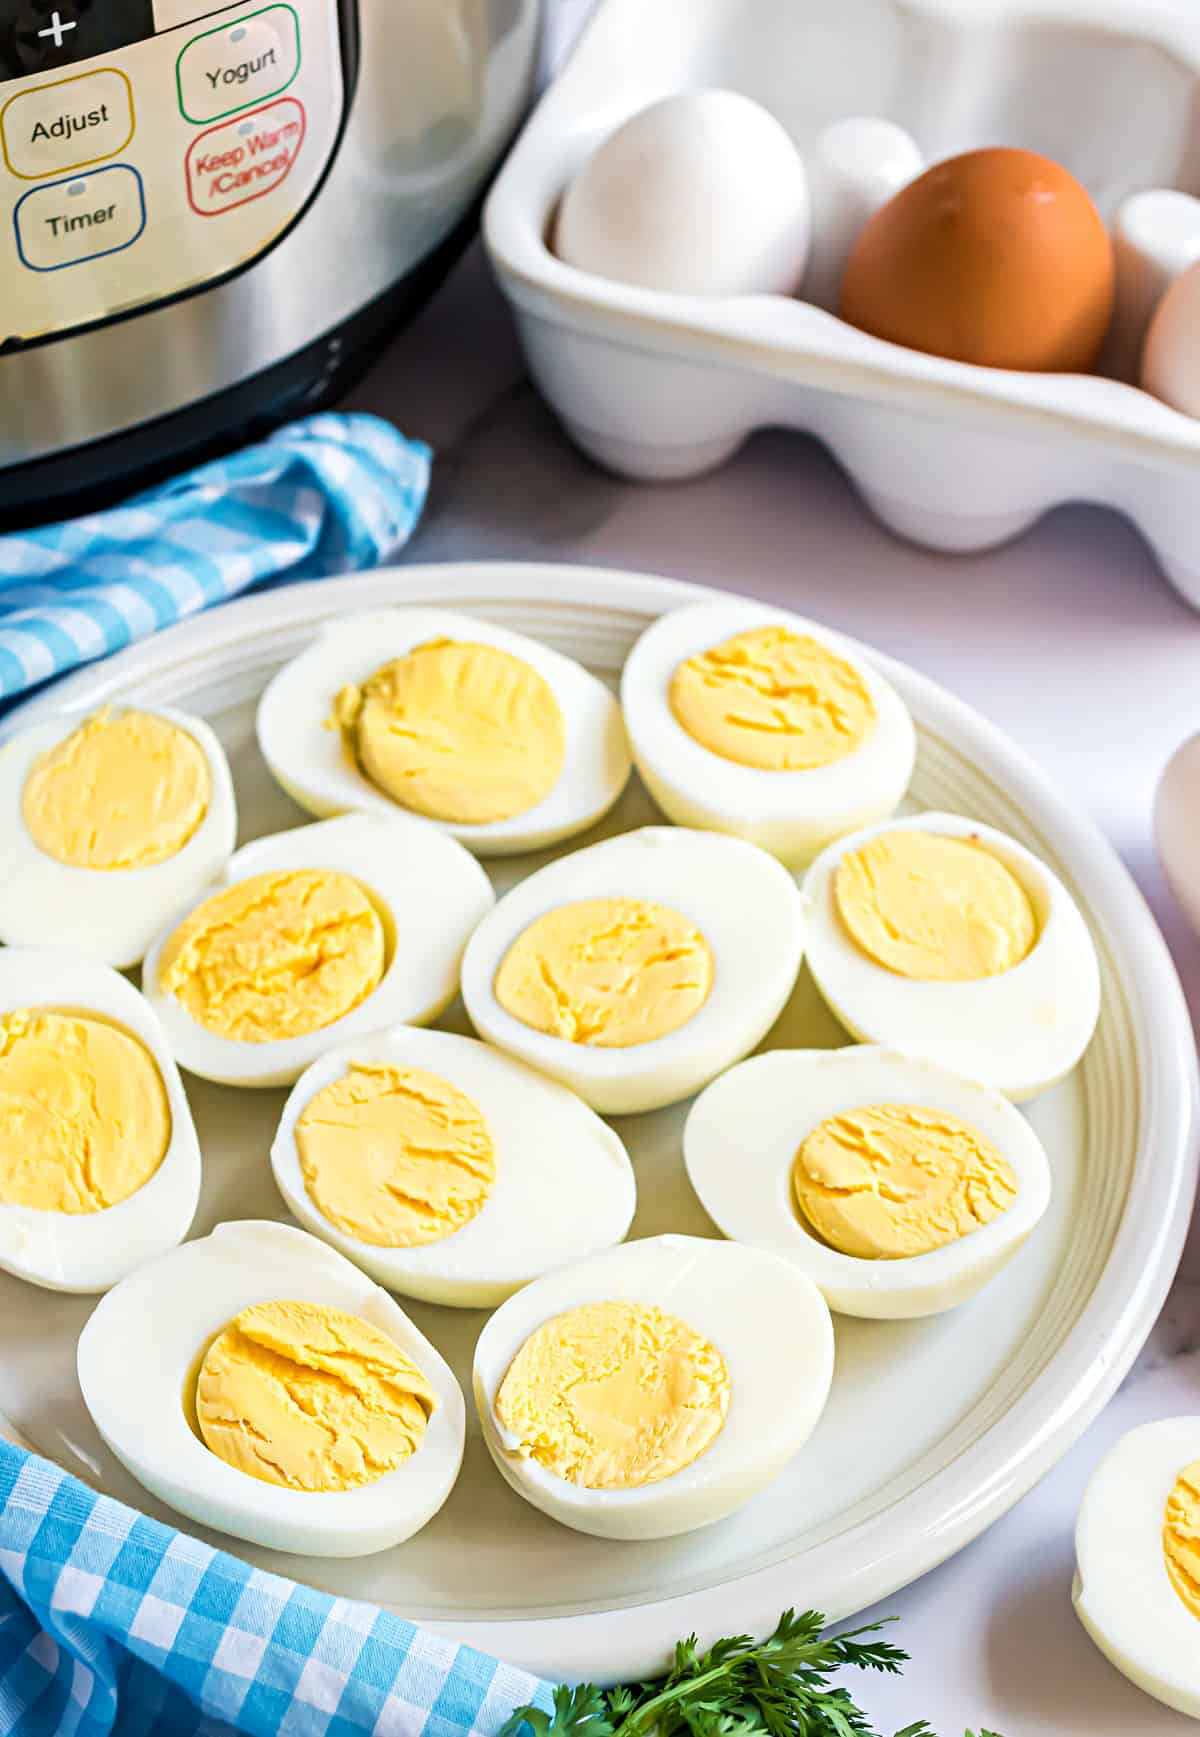 Hard boiled eggs cut in half on a white serving plate.